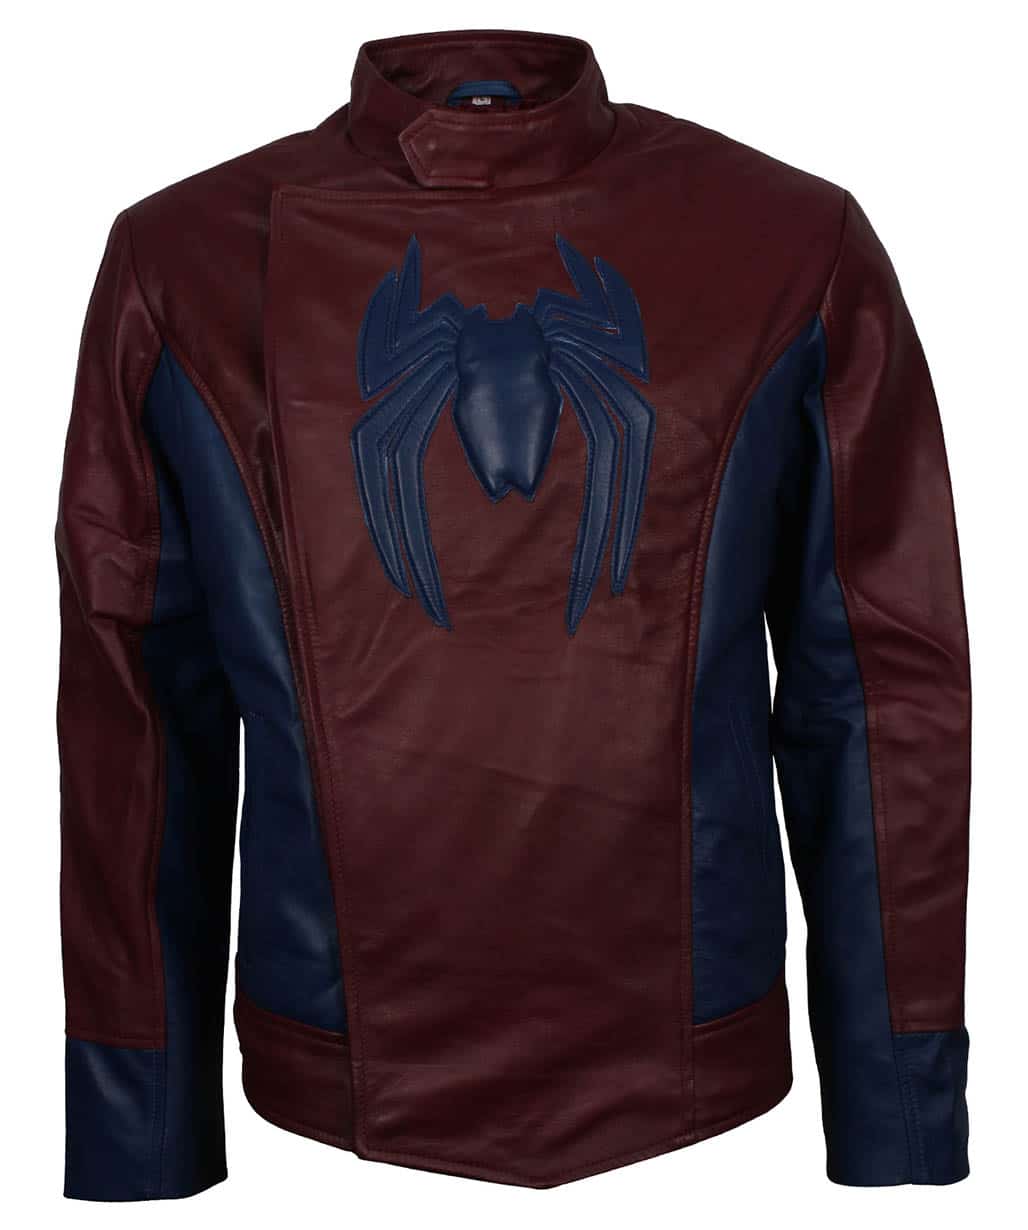 tom-holland-spiderman-home-coming-jacket